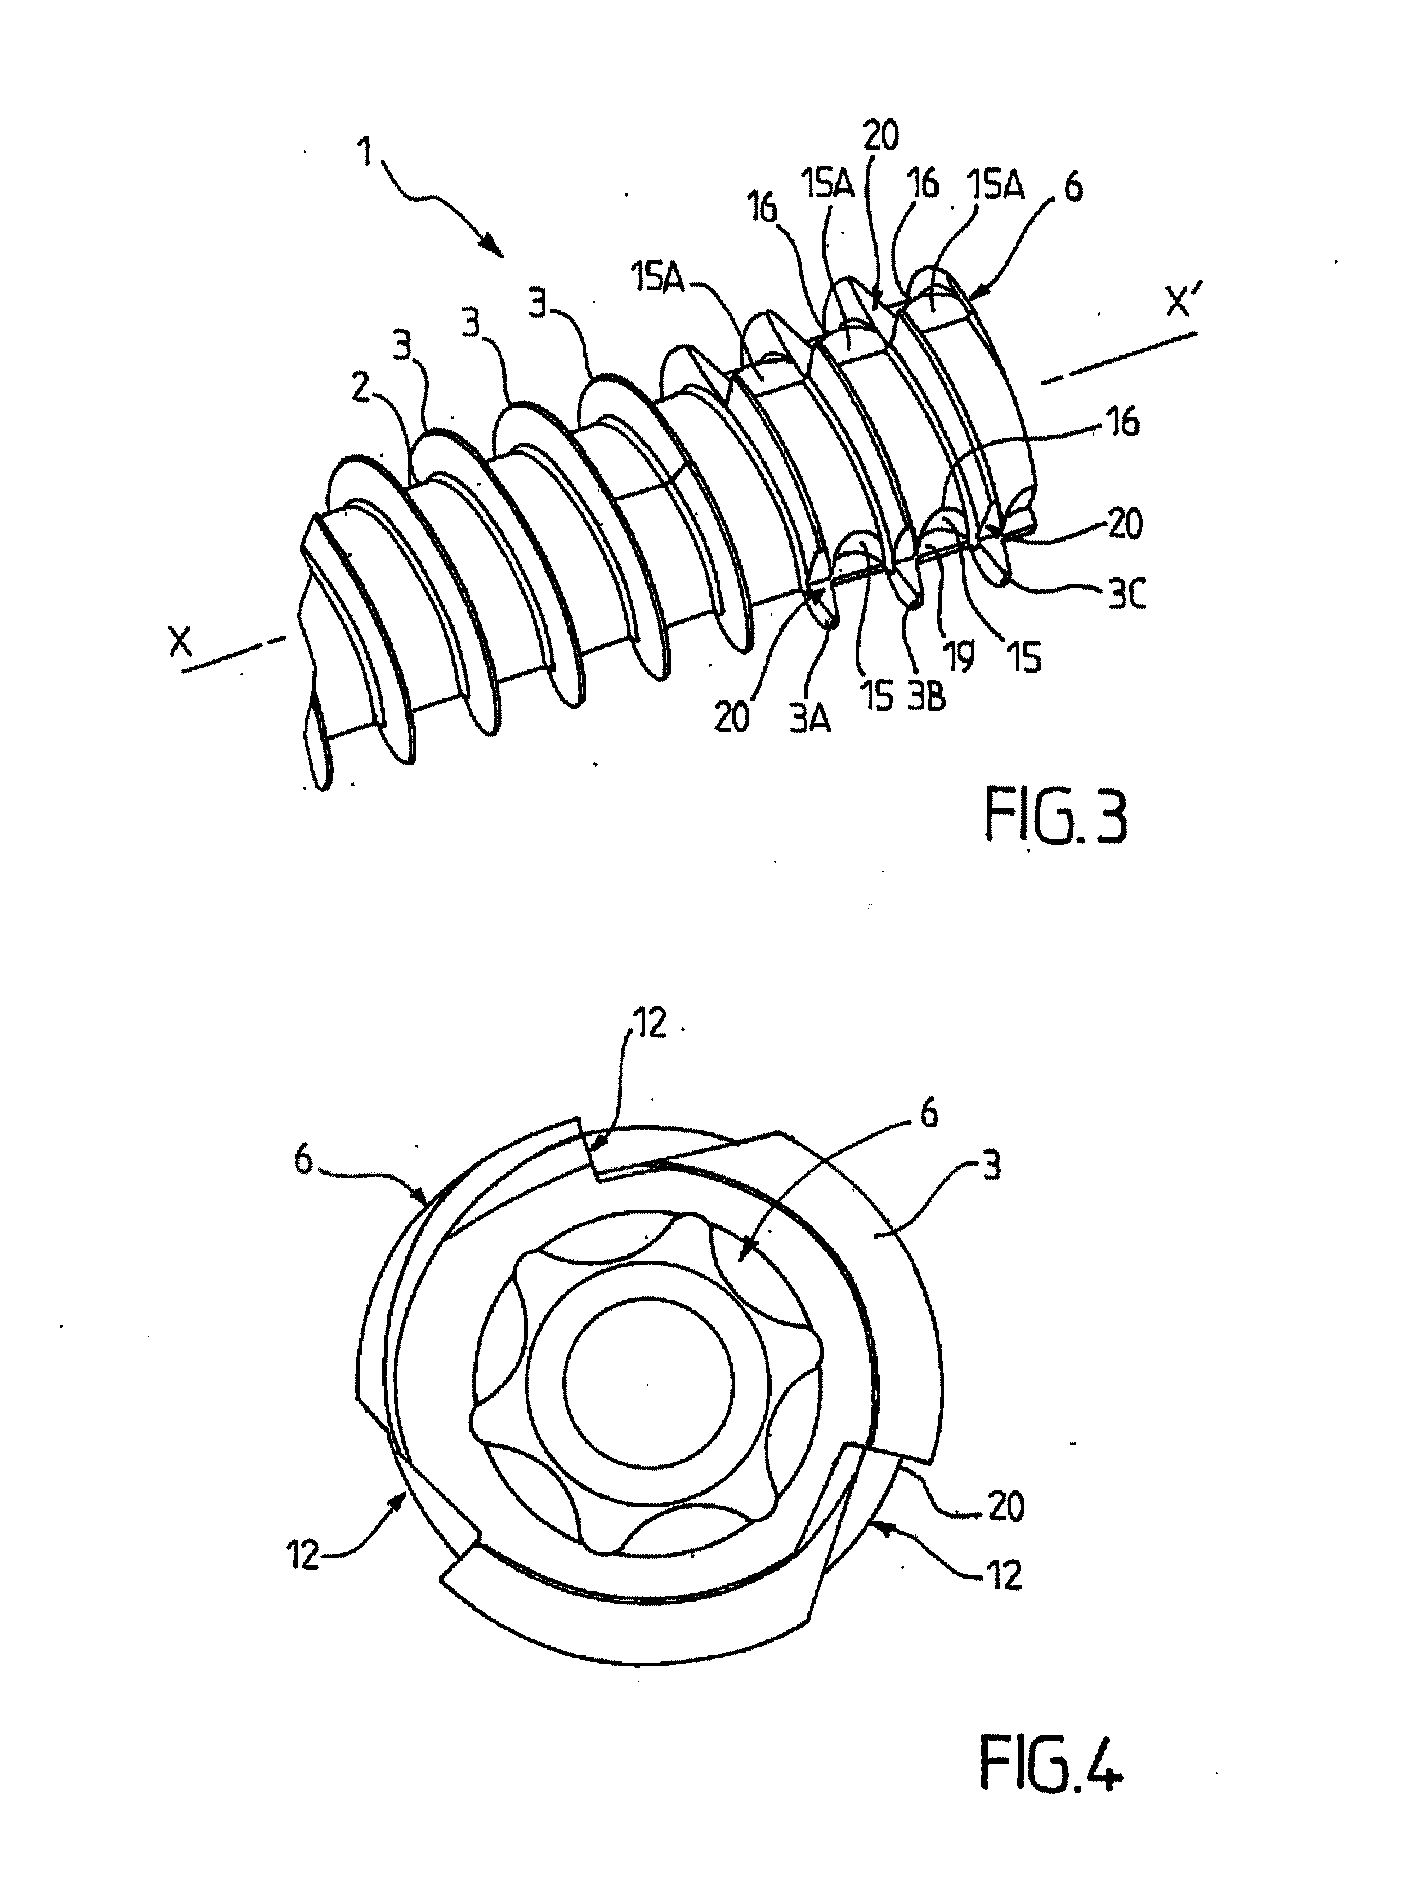 Osteosynthesis screw with reduced radial compression